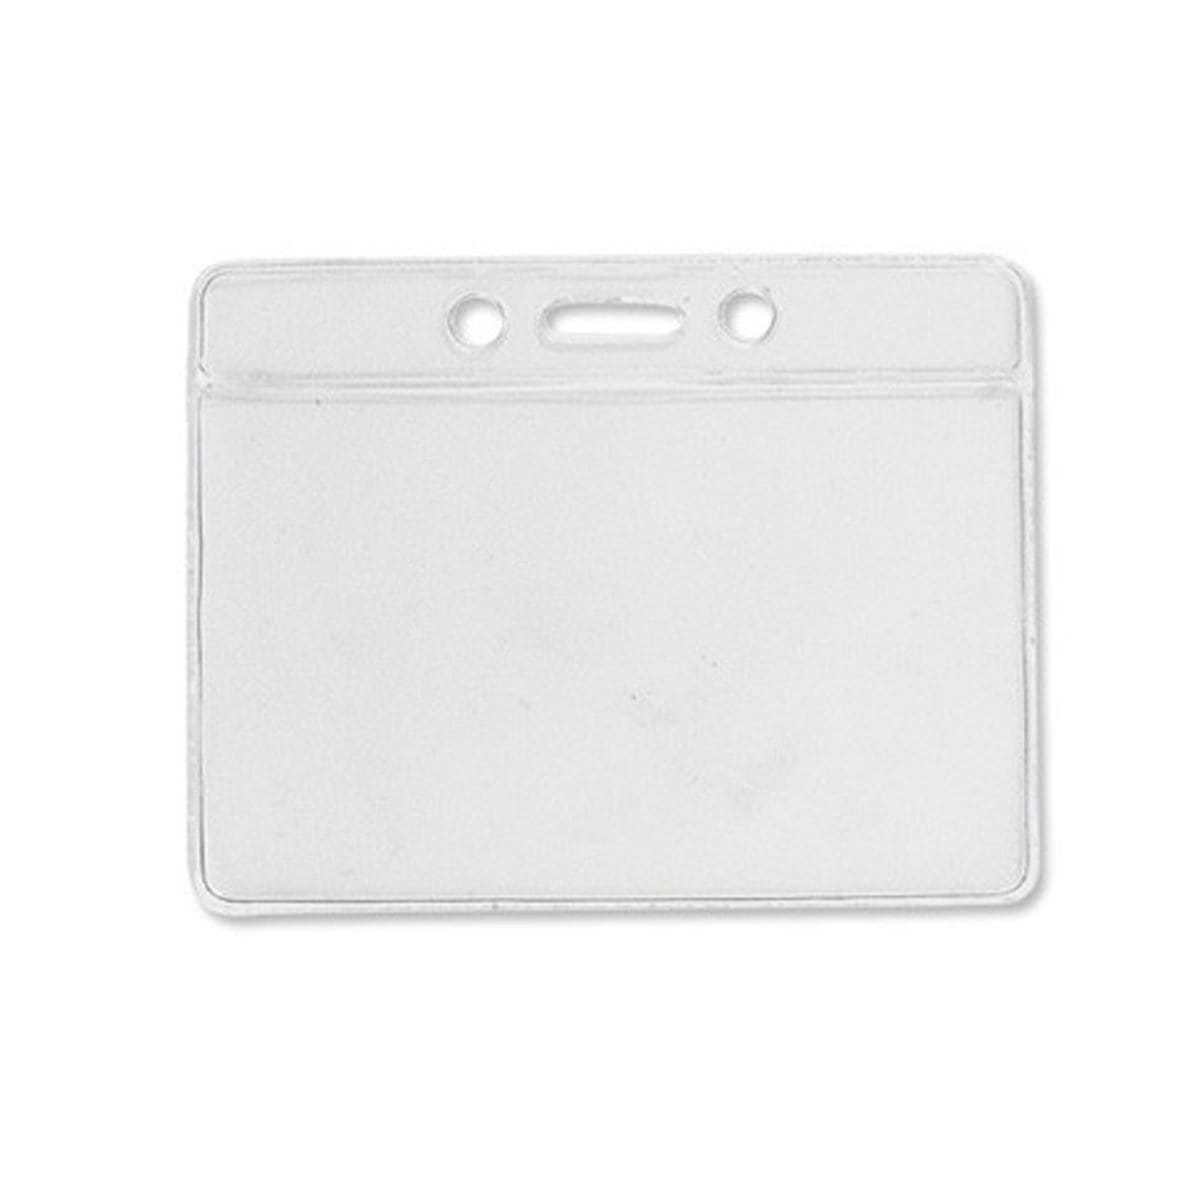 A Standard Horizontal Vinyl ID Badge Holder (1820-1000), transparent horizontal vinyl ID badge holder with three holes at the top for attachment, perfectly sized to fit a credit card sized ID card.